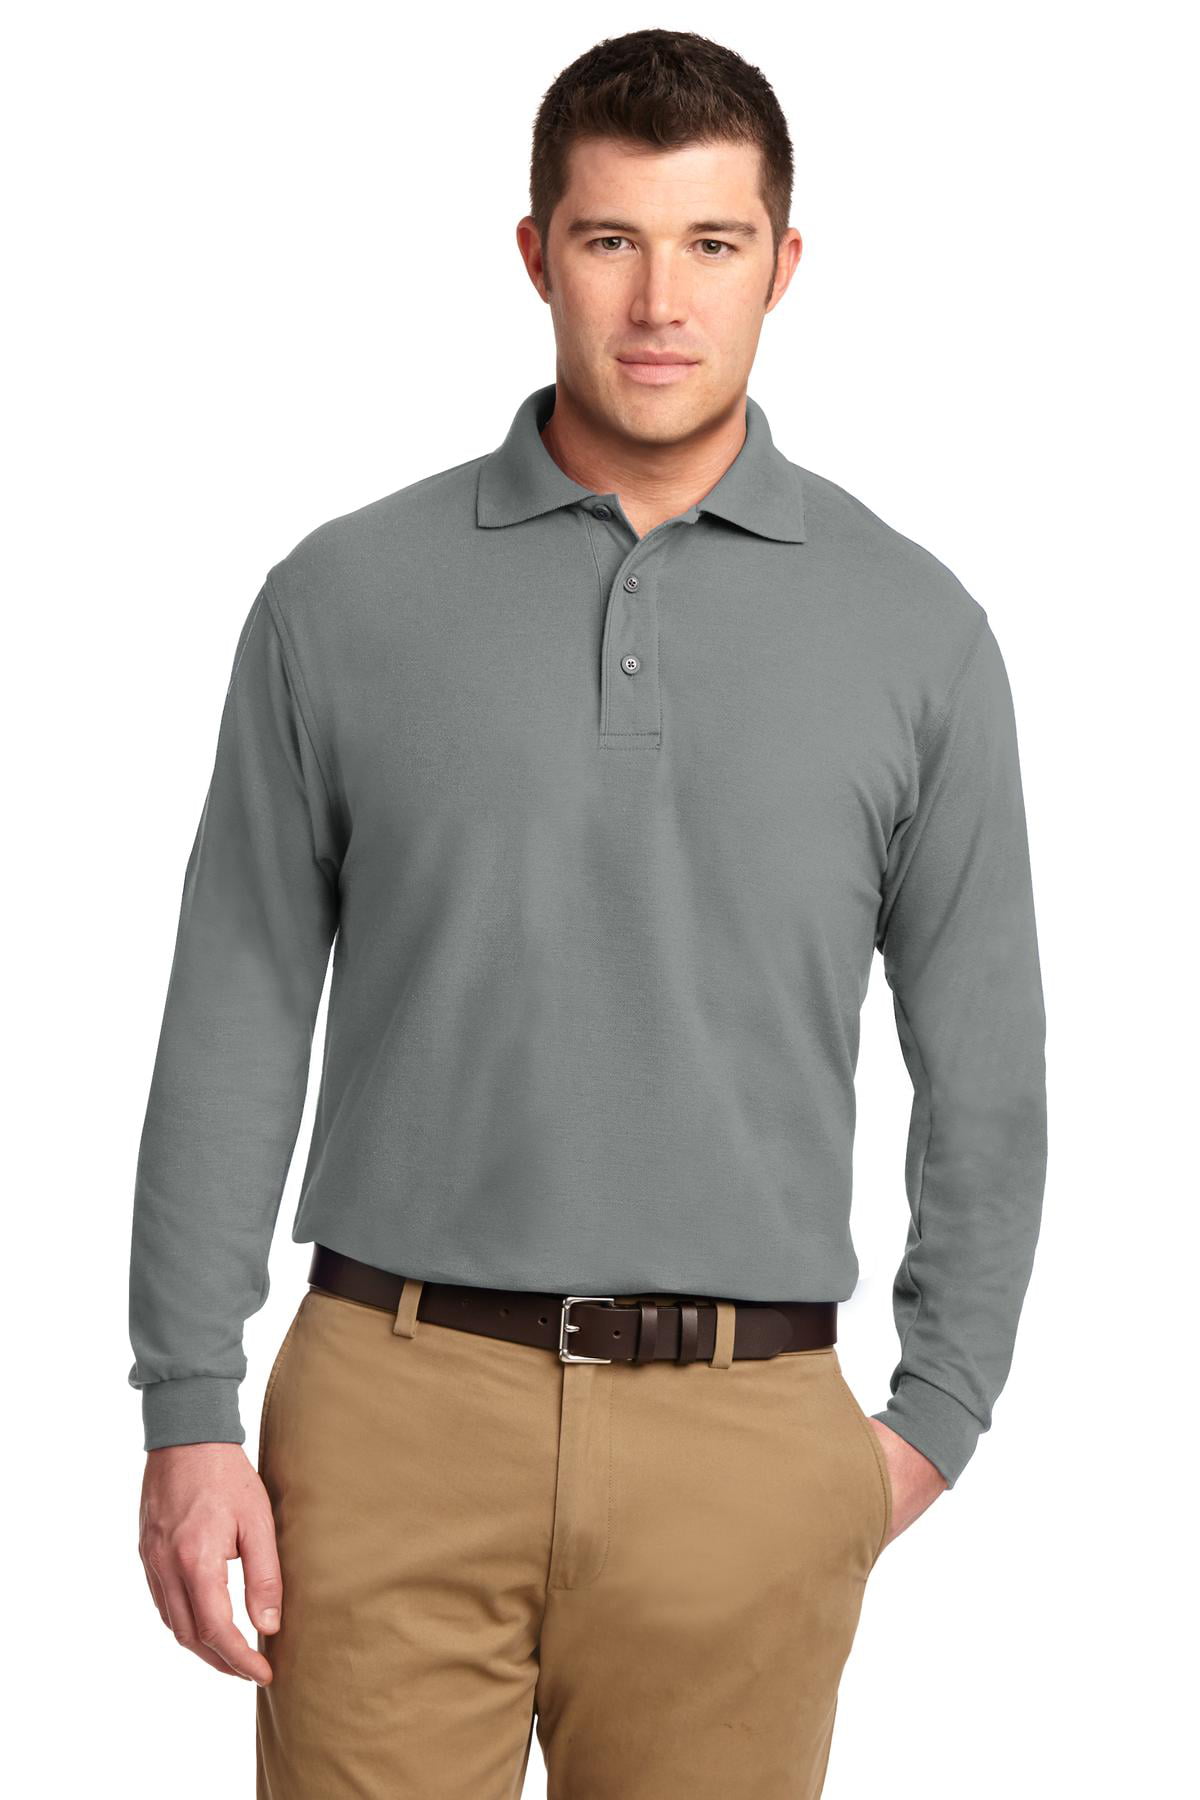 Port Authority Long Sleeve Silk Touch Polo K500LS Mens 